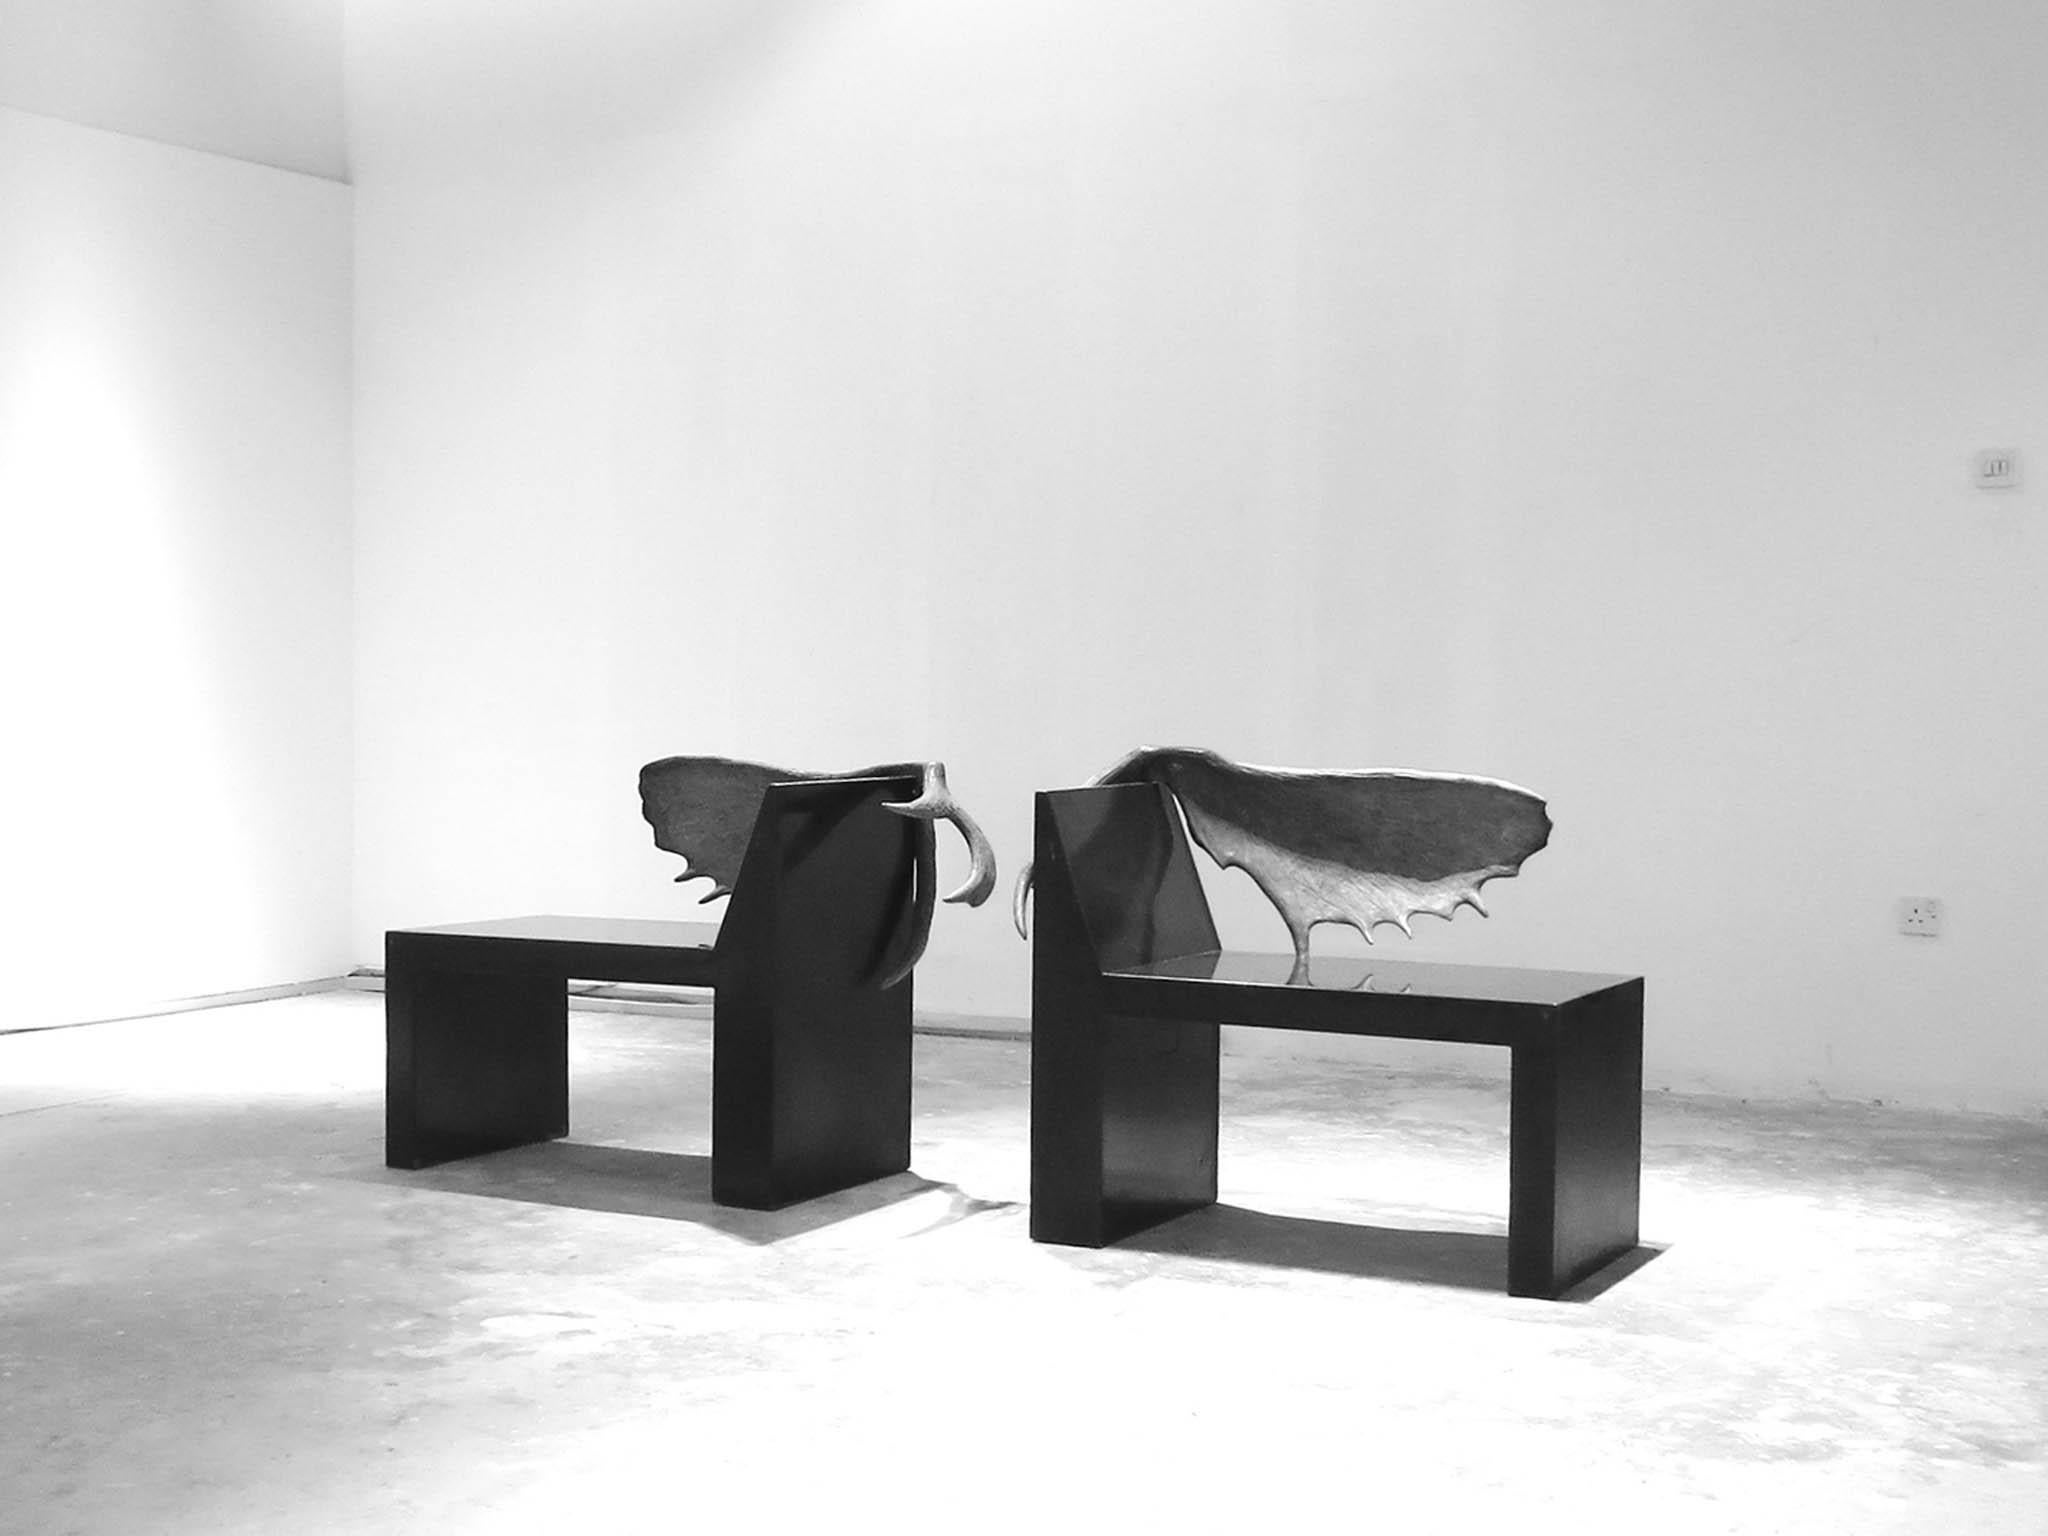 Rick Owens on furniture: 'Comfort isn't everything' | The Independent